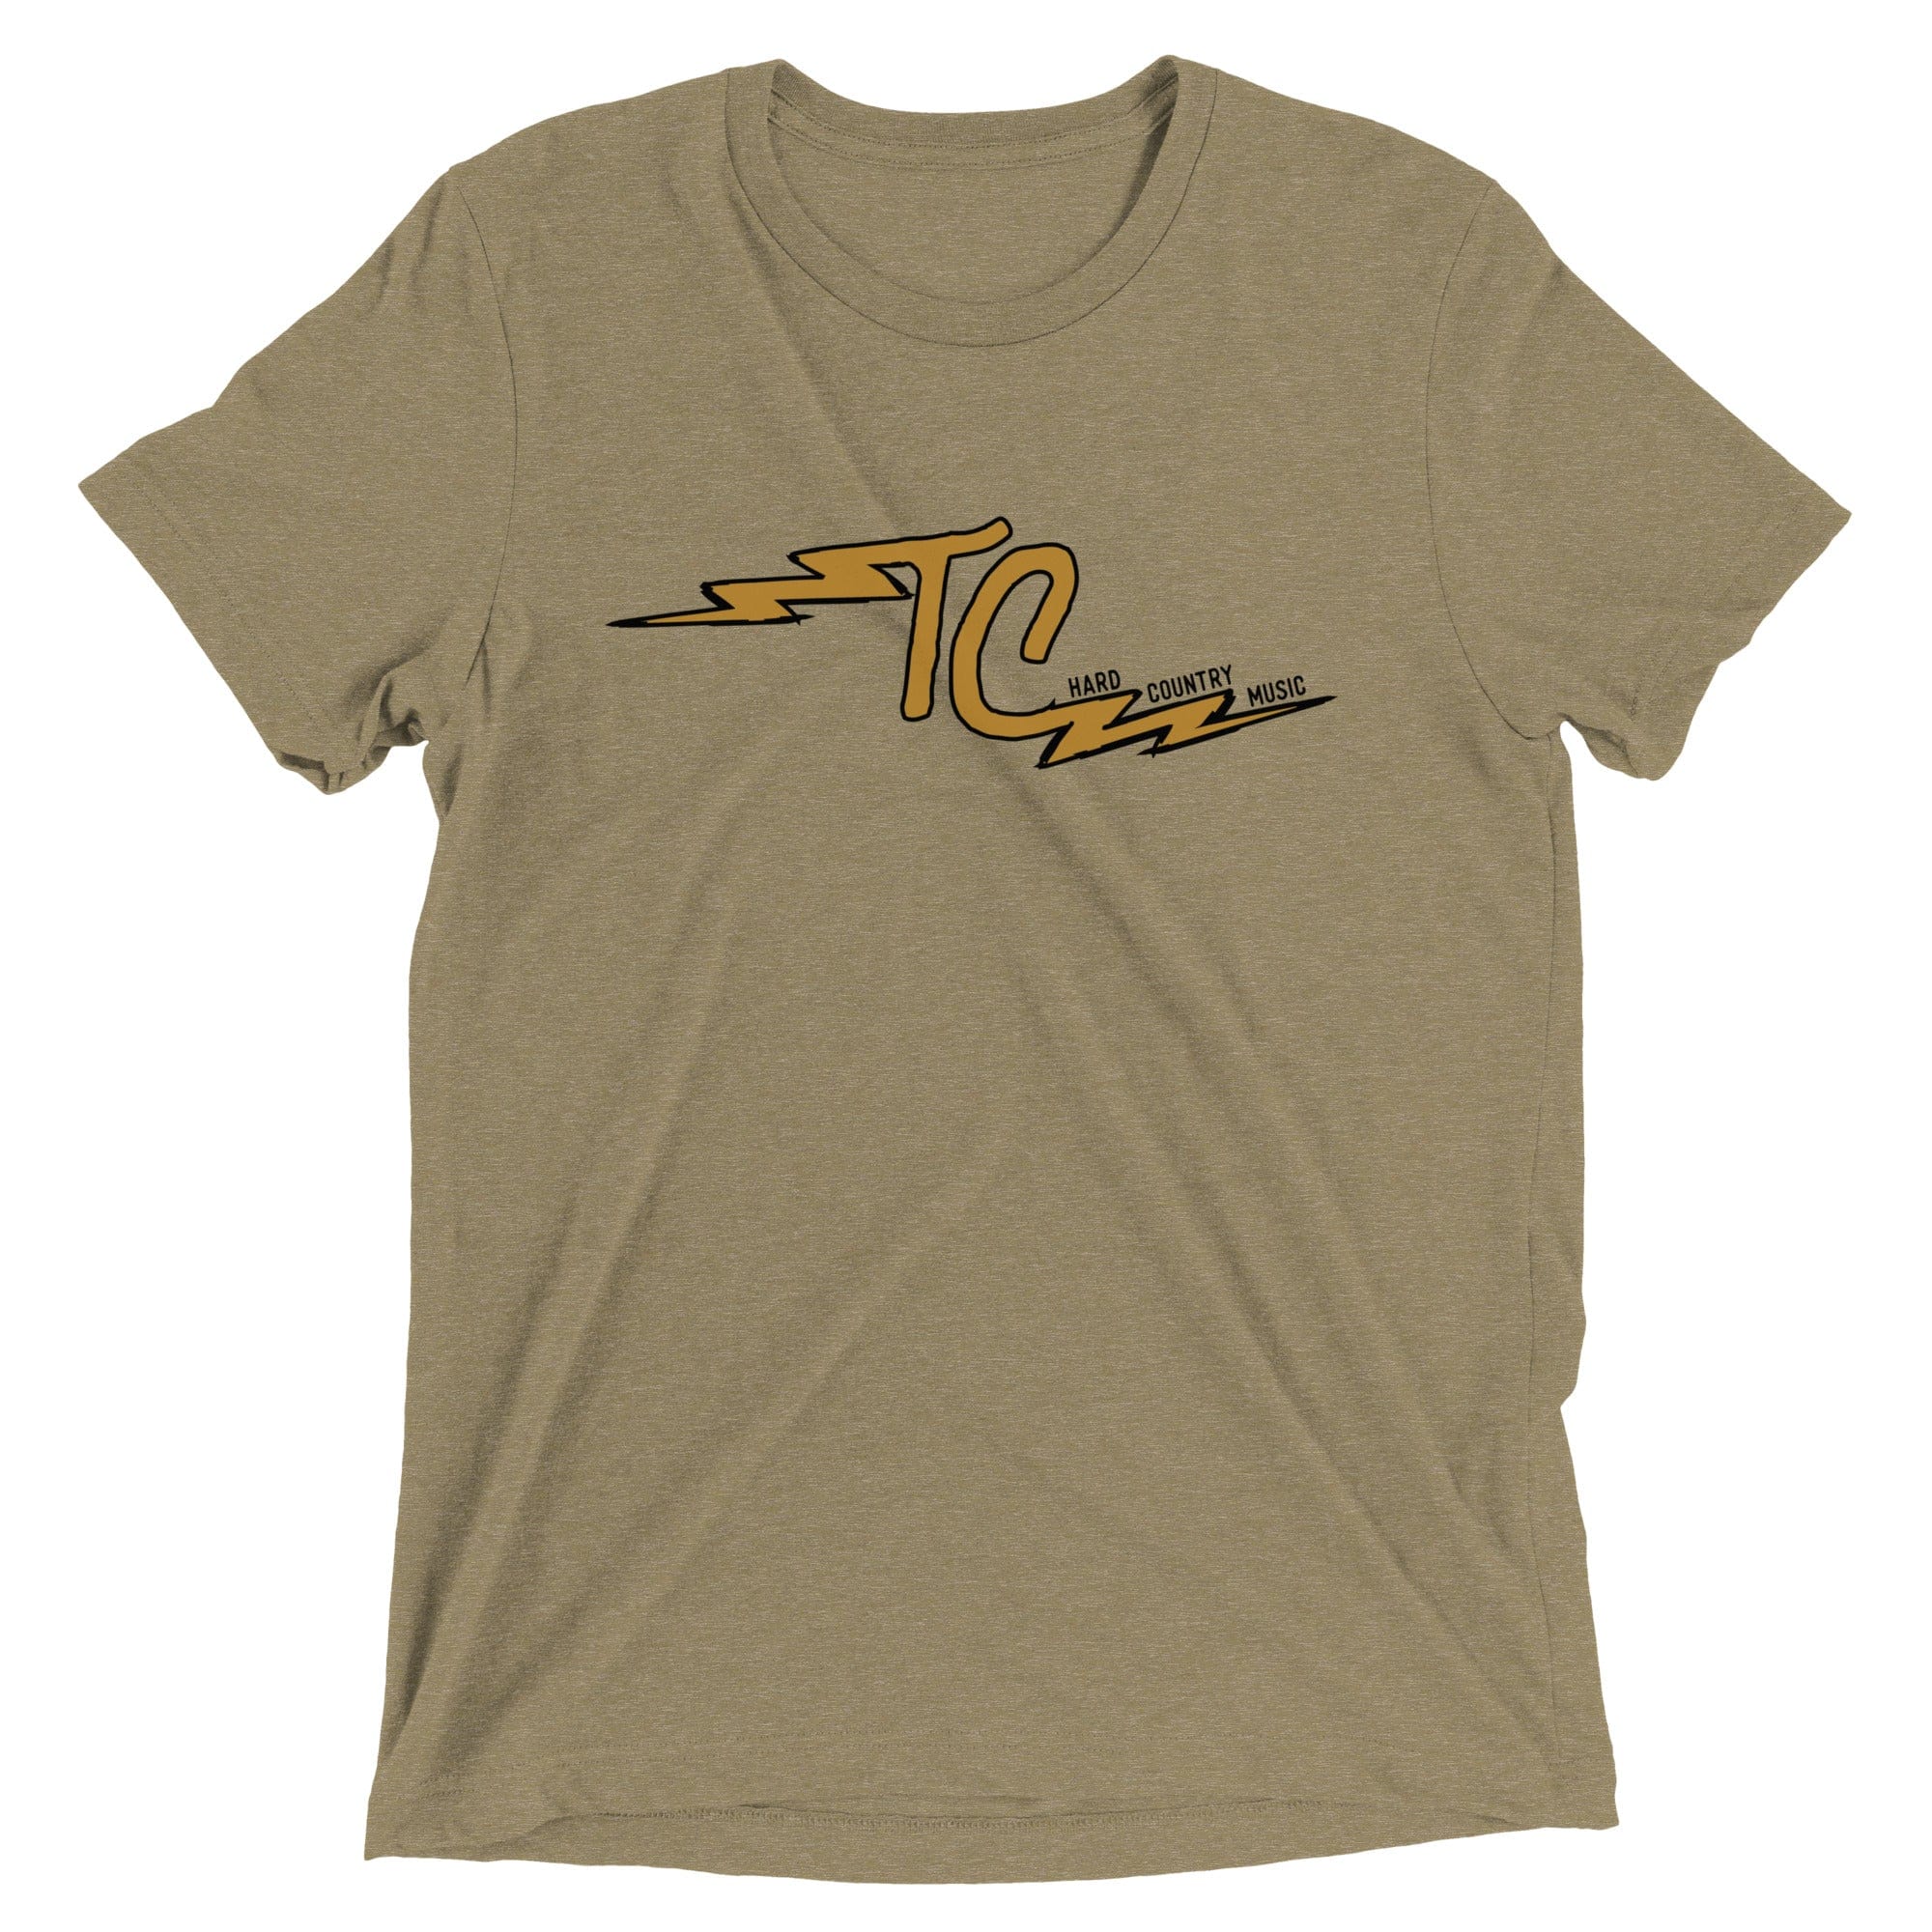 Cowboy Revolution Apparel Co. Trent Cowie "Hard Country Music" Short Sleeve Tri-Blend Tee (Olive)